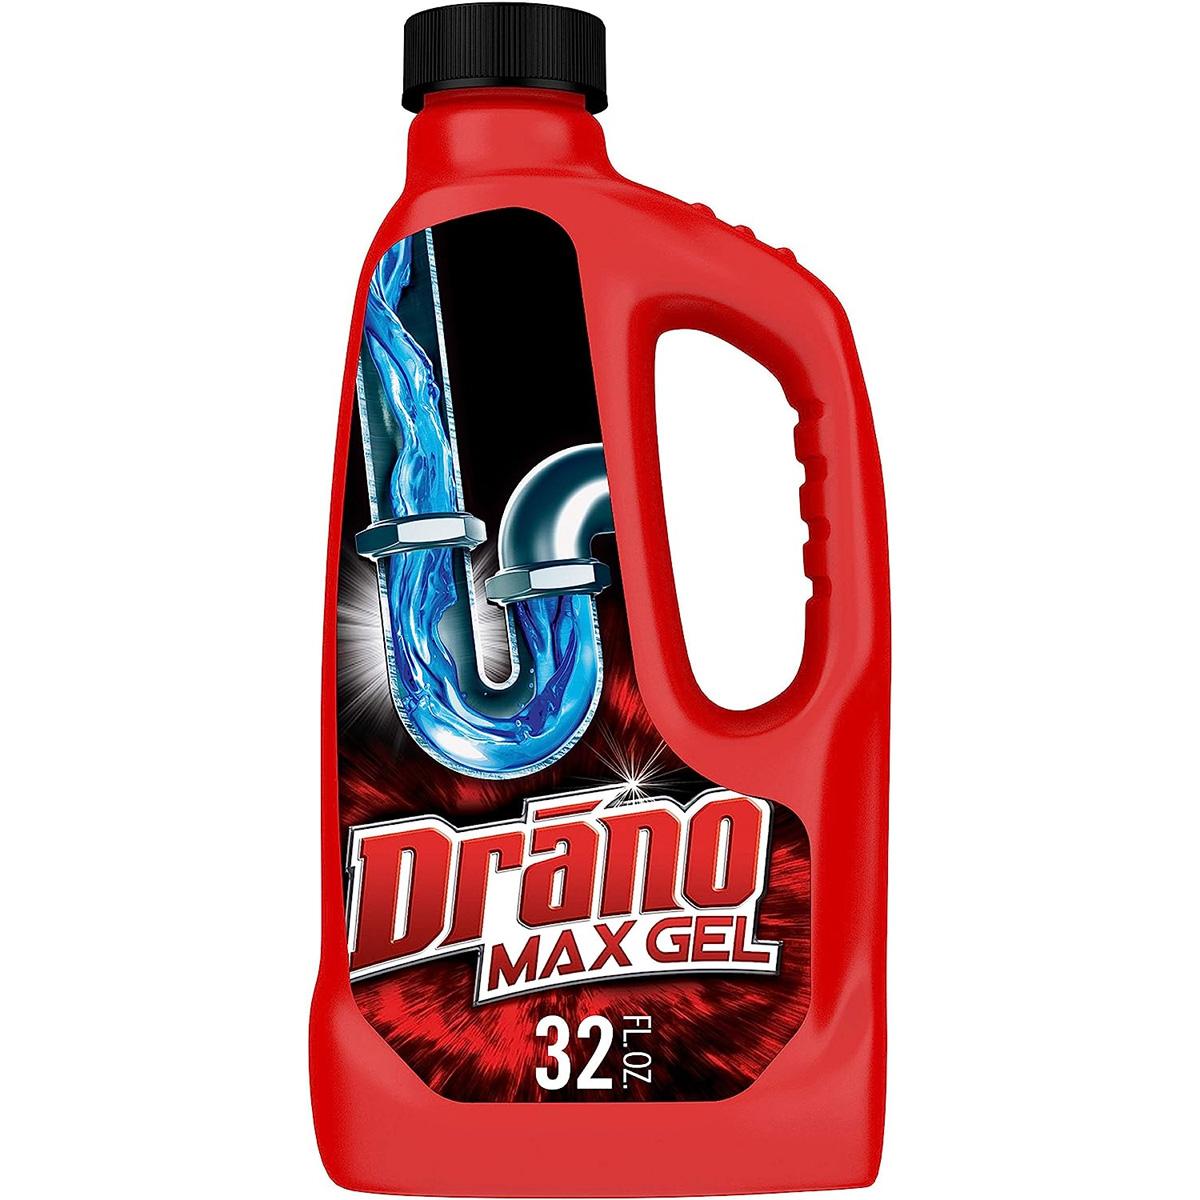 Drano Max Gel Household Clog Remover Cleaner 32oz for $3.51